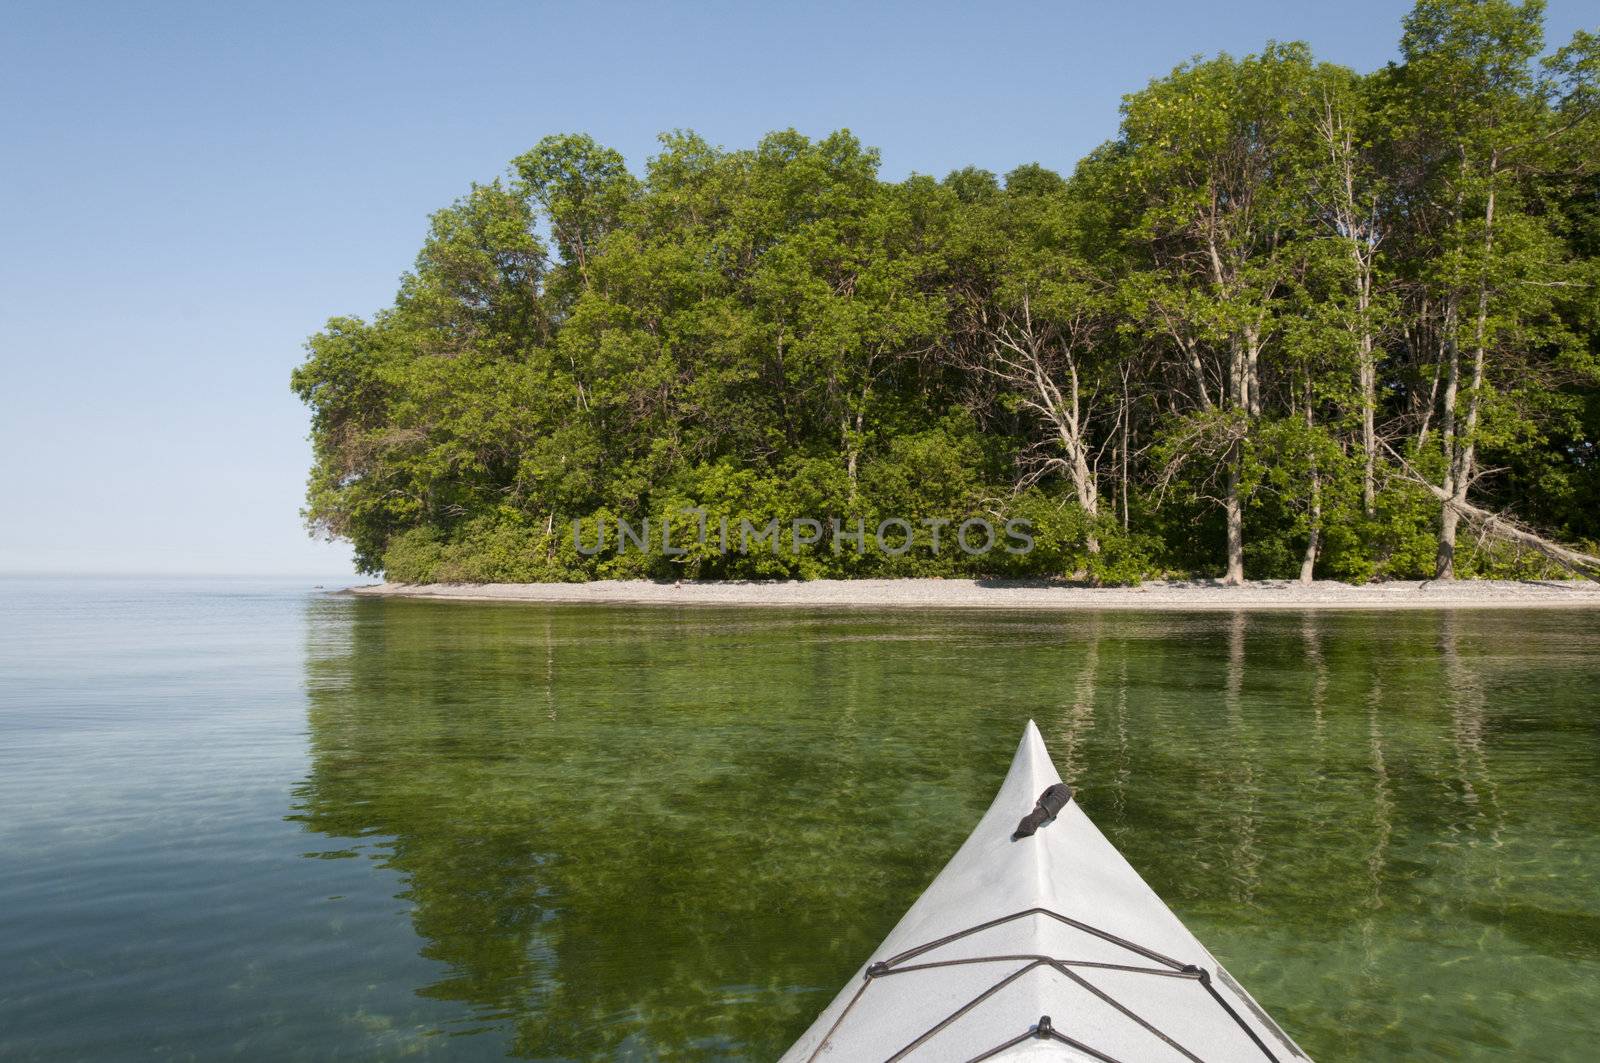 Kayak bow in the foreground on Lake Ontario with the shoreline in the background